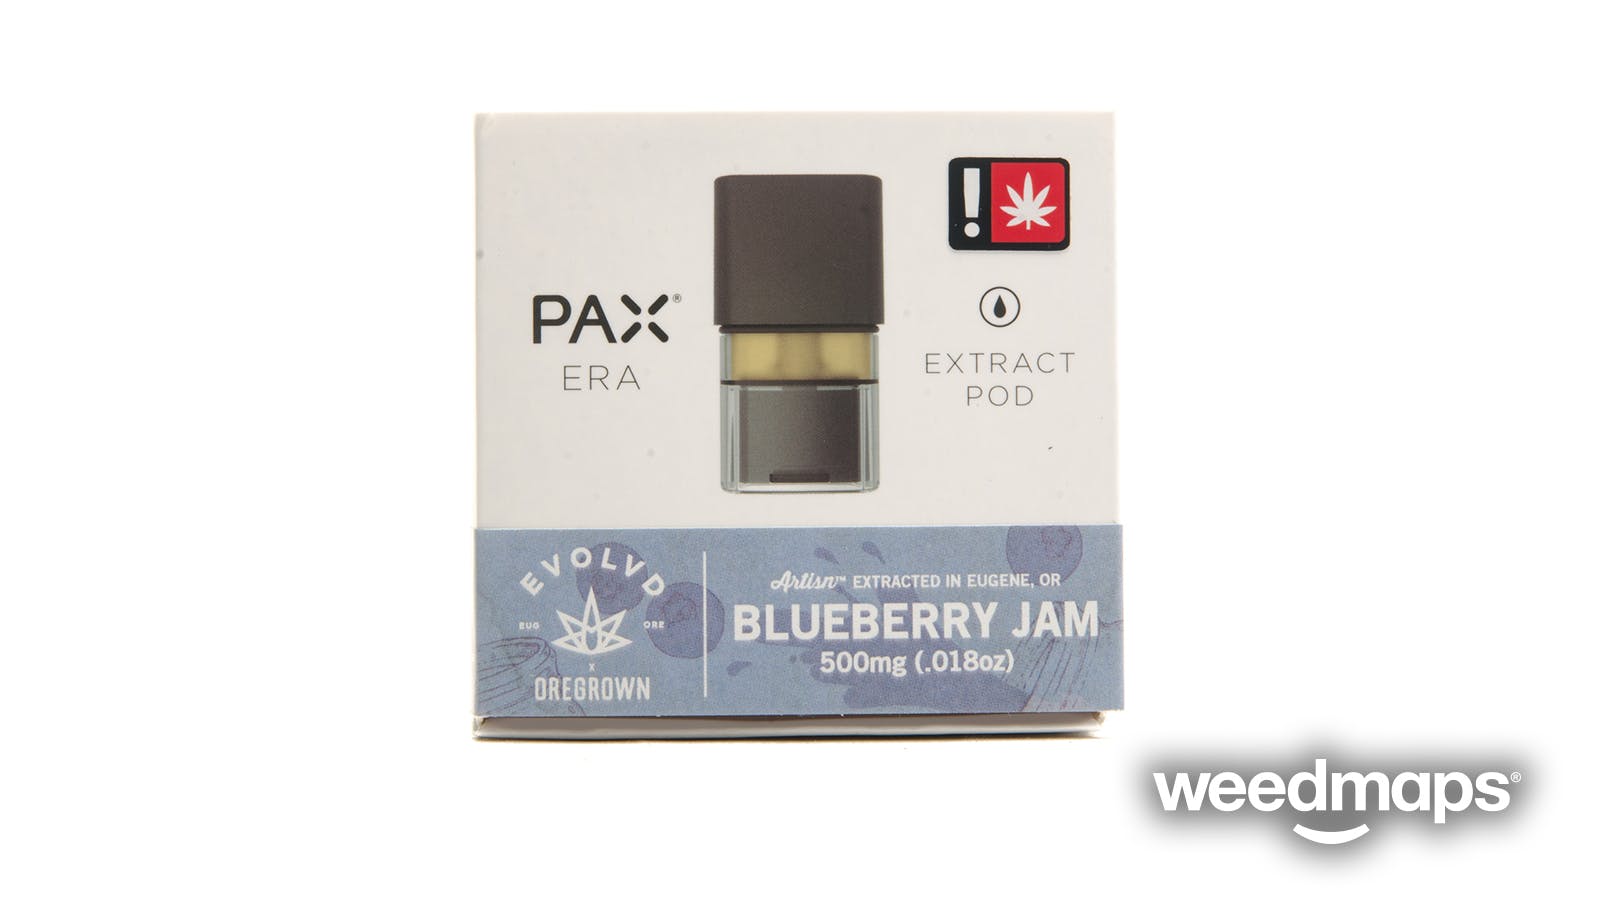 concentrate-pax-era-extract-pod